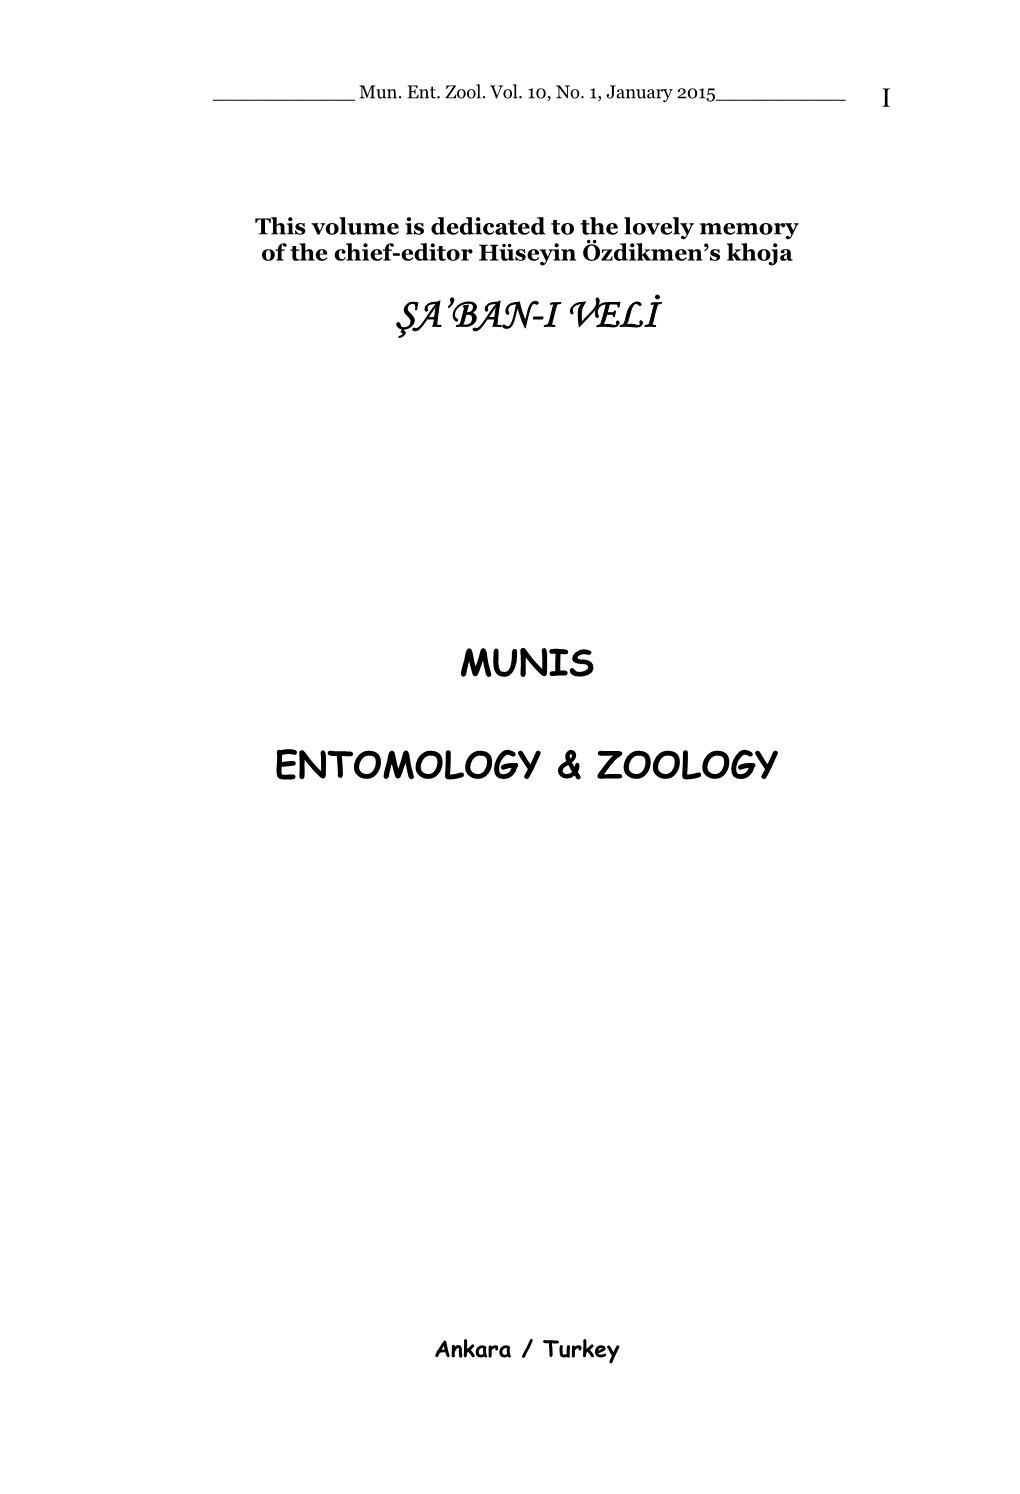 Scope: Munis Entomology & Zoology Publishes a Wide Variety of Papers